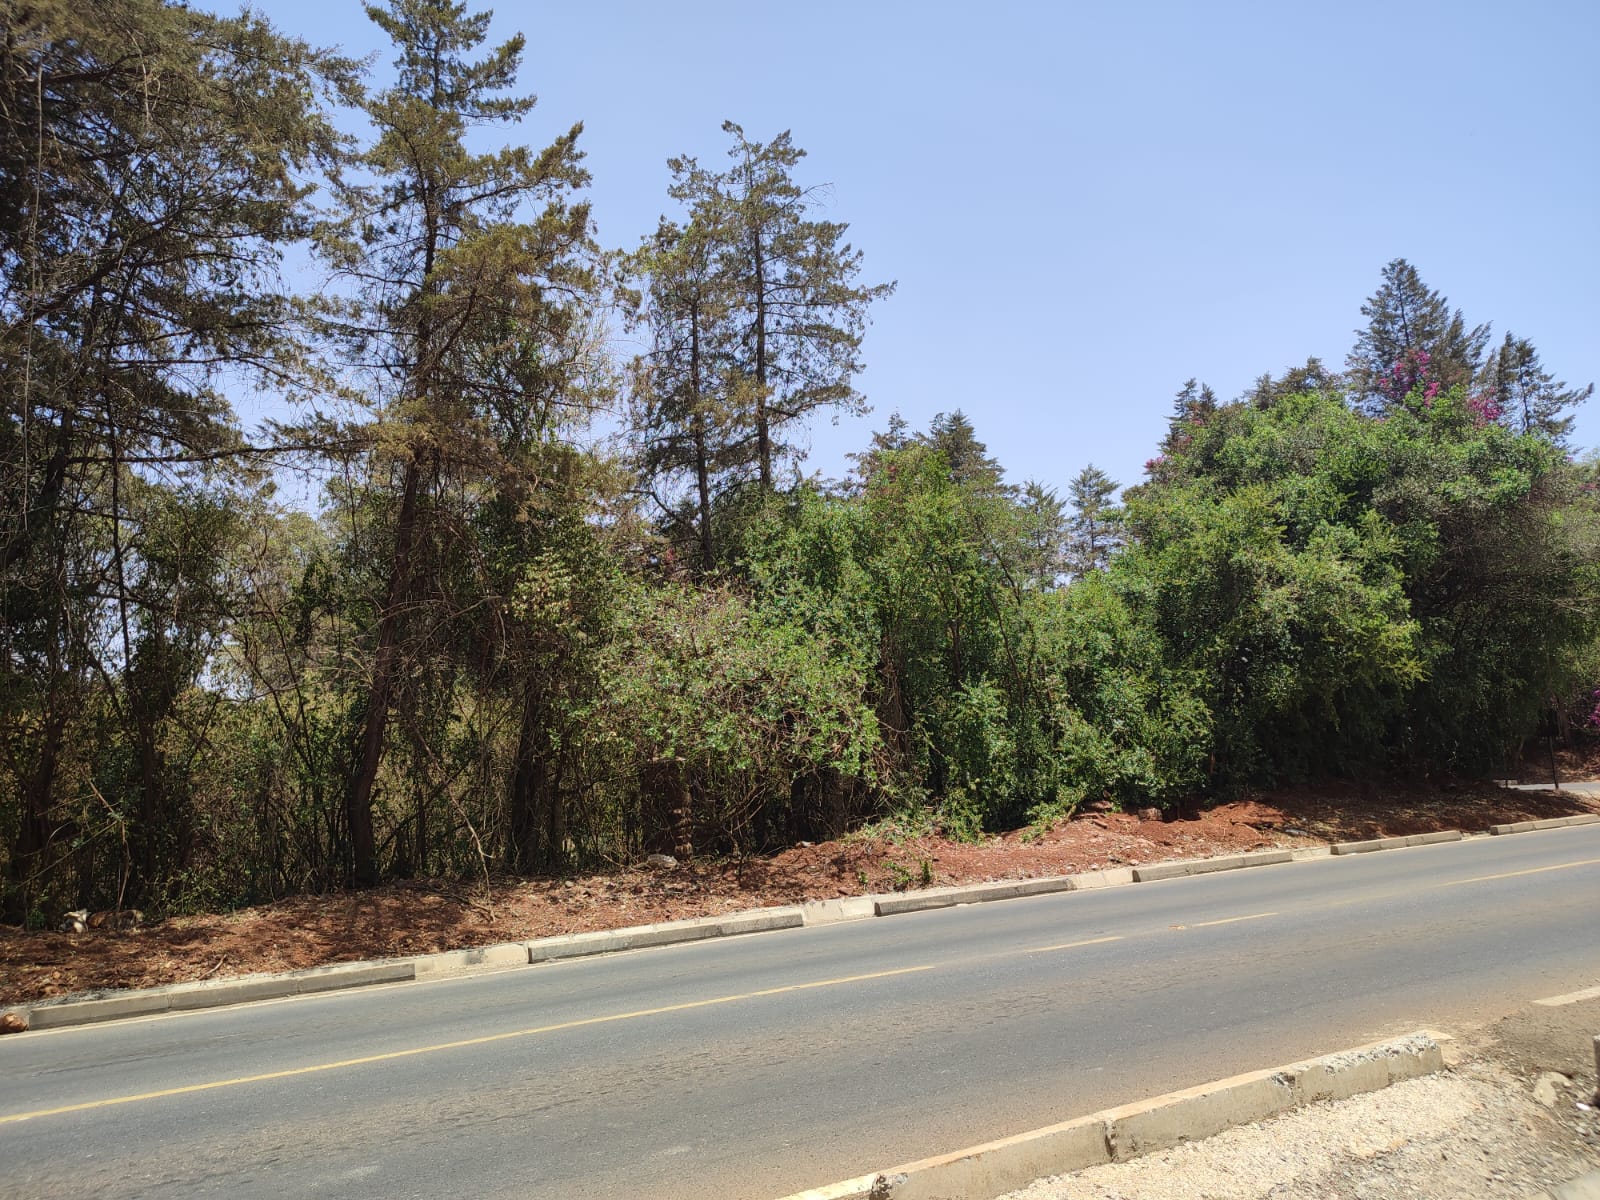 Karen land for sale 4 half acre plots in Hardy Masai West Road Ready Tittle Deed Exclusive!